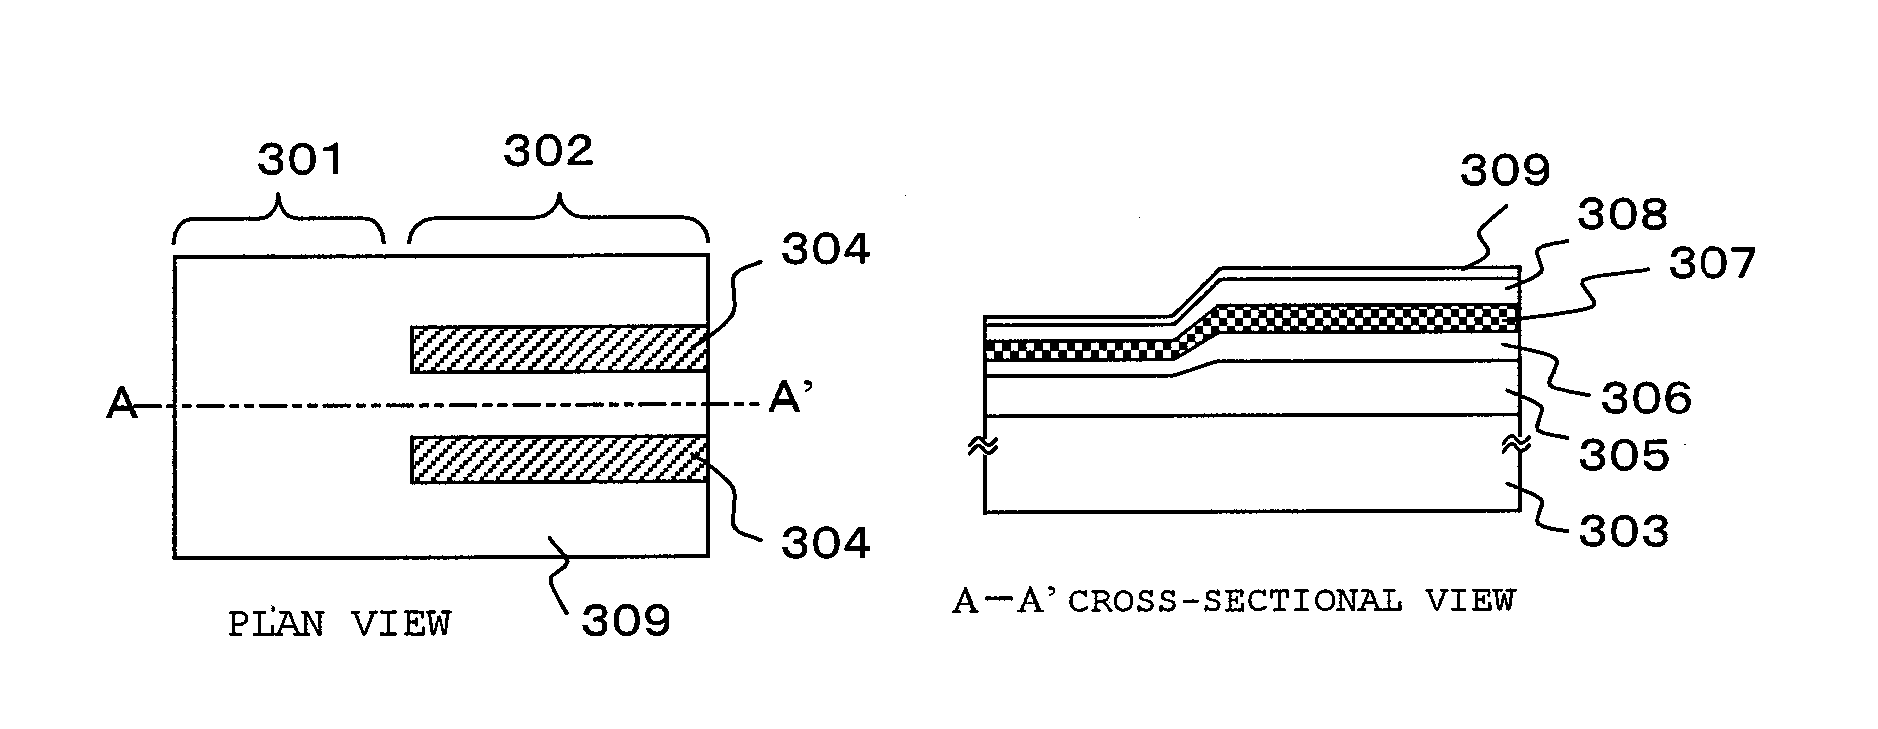 Semiconductor optical device and optical transmission module